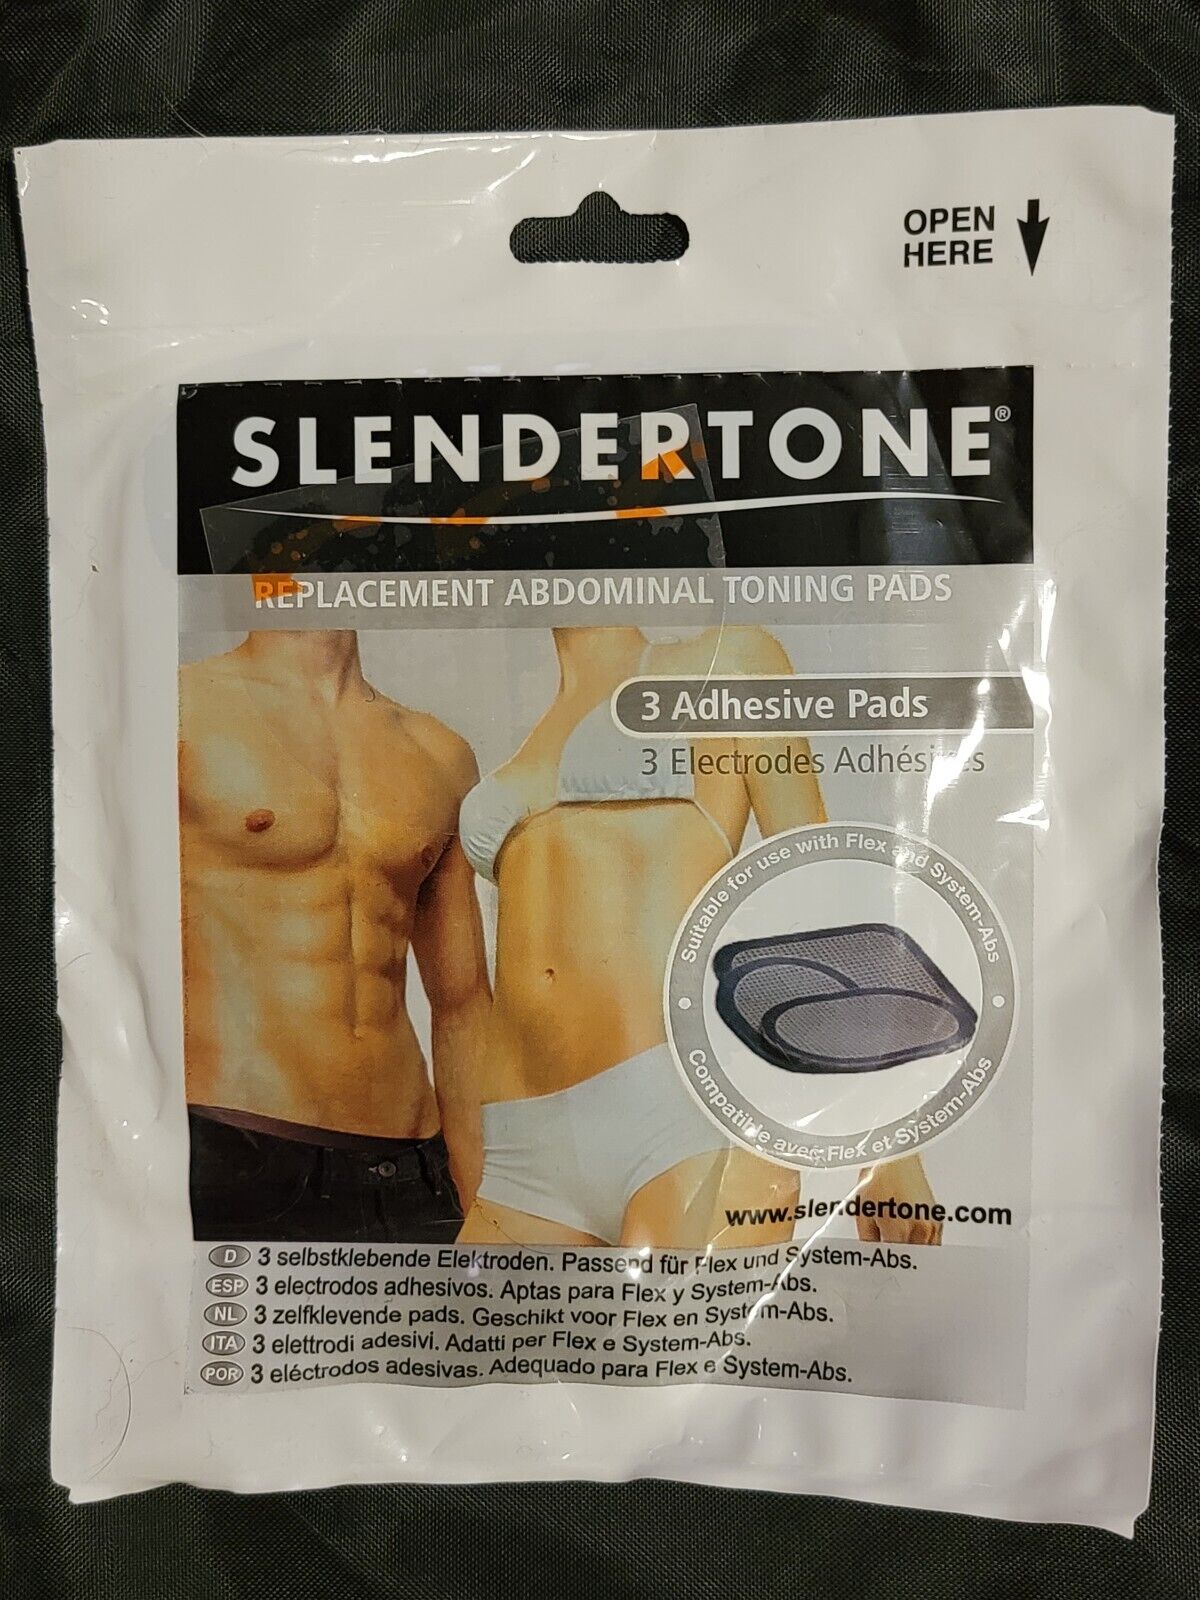 Slendertone Single Pack Replacement Ab GelPads - 3 Pads for sale online